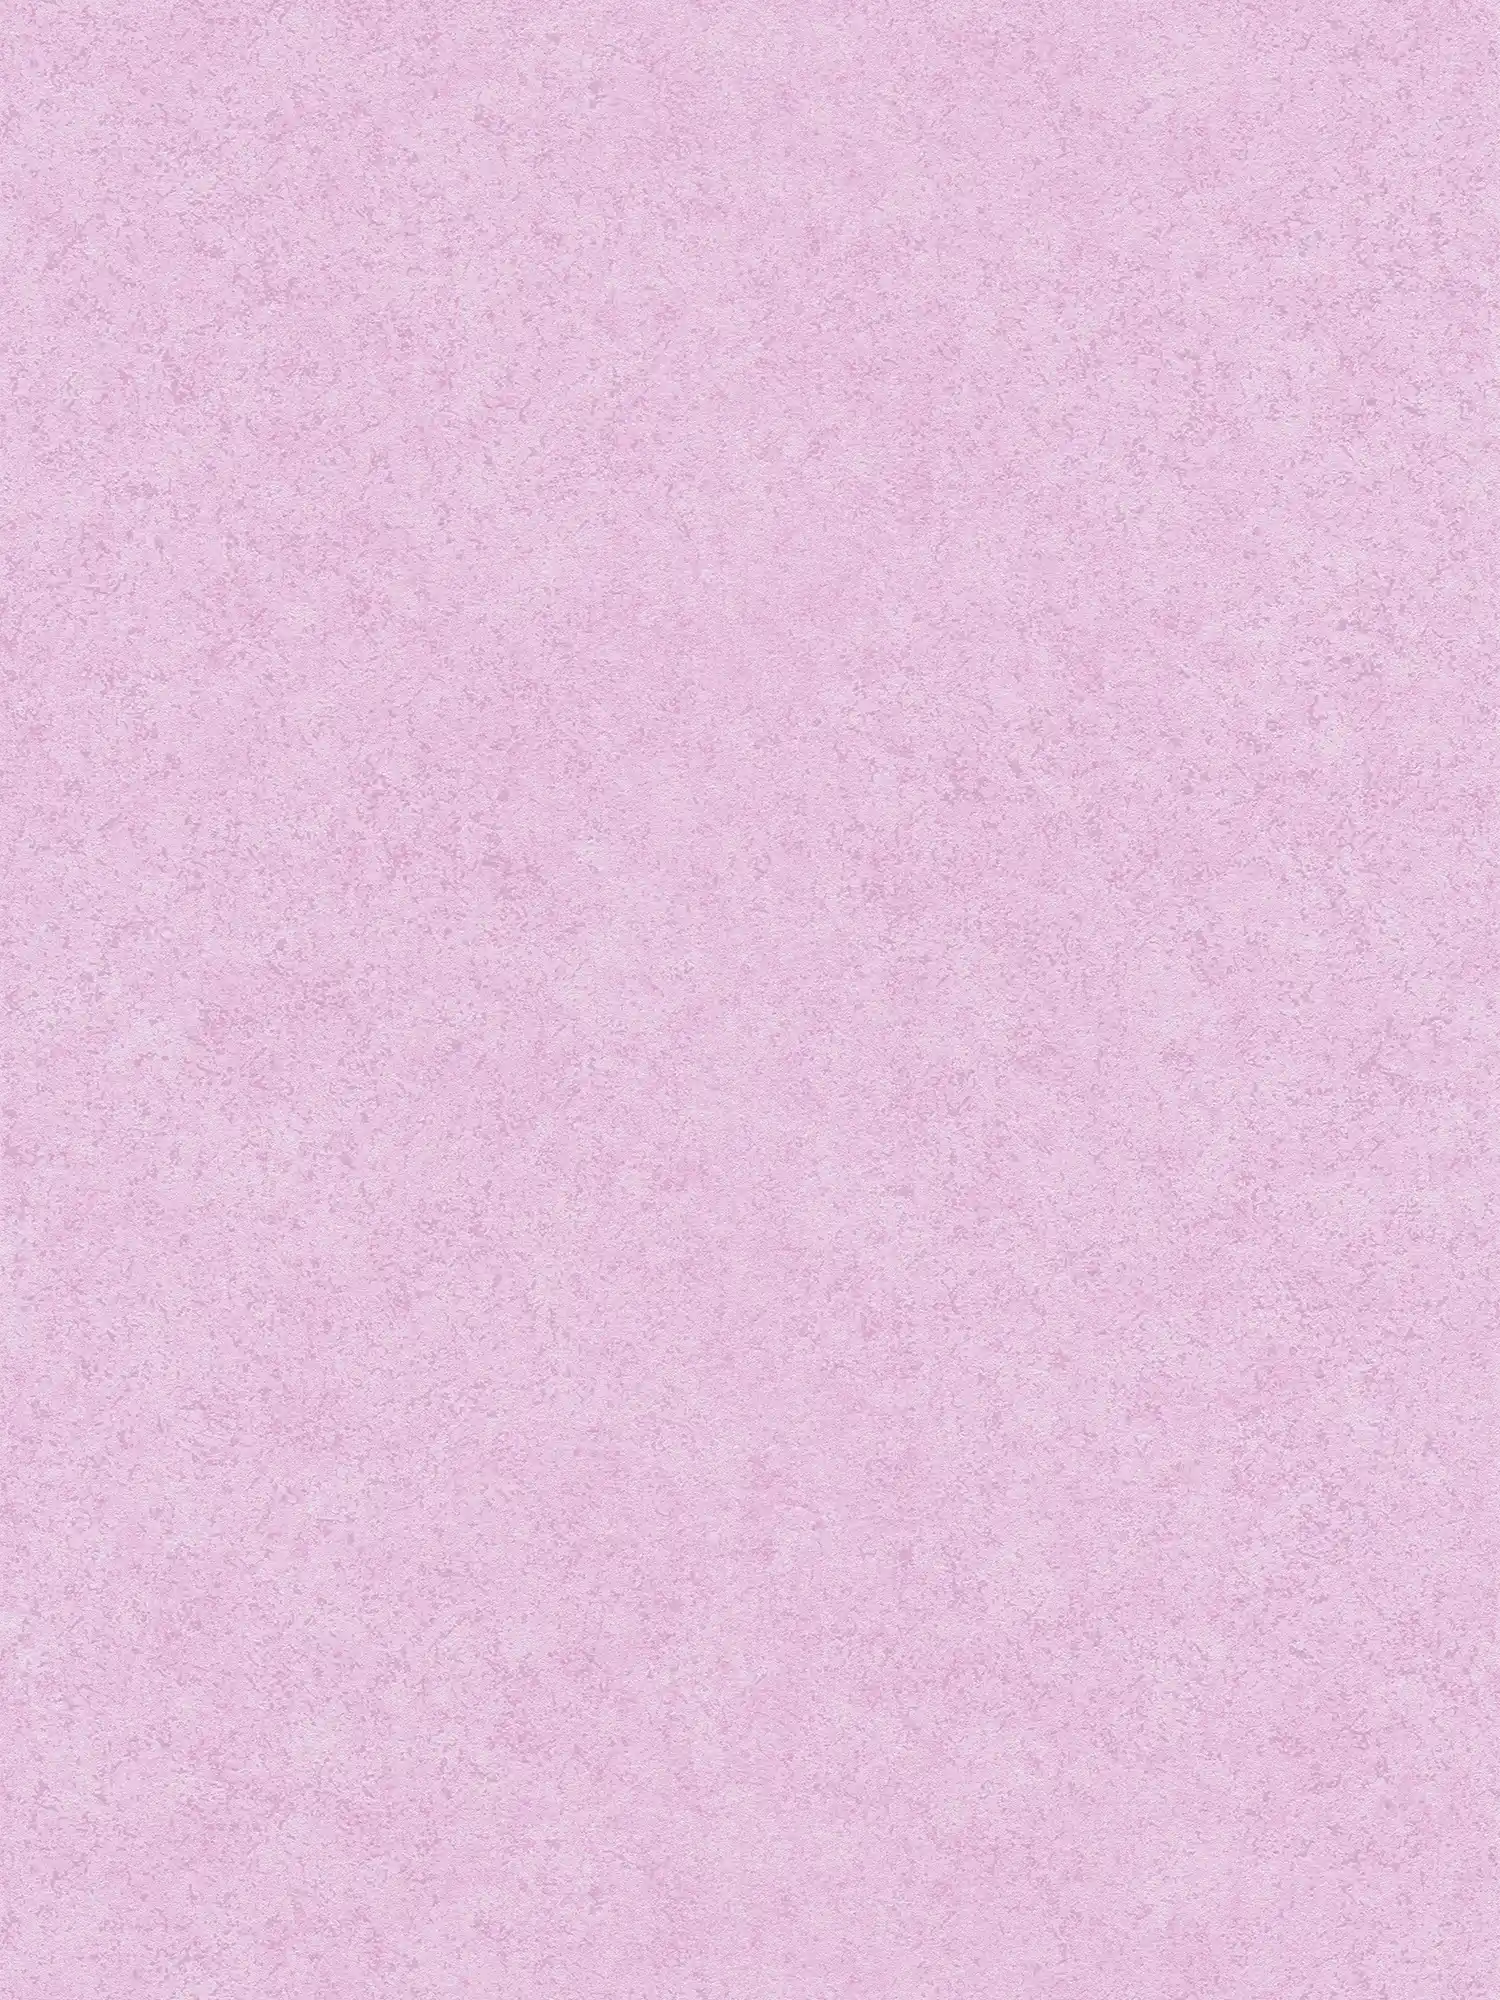 Non-woven wallpaper pink plaster look with matte pattern - pink
